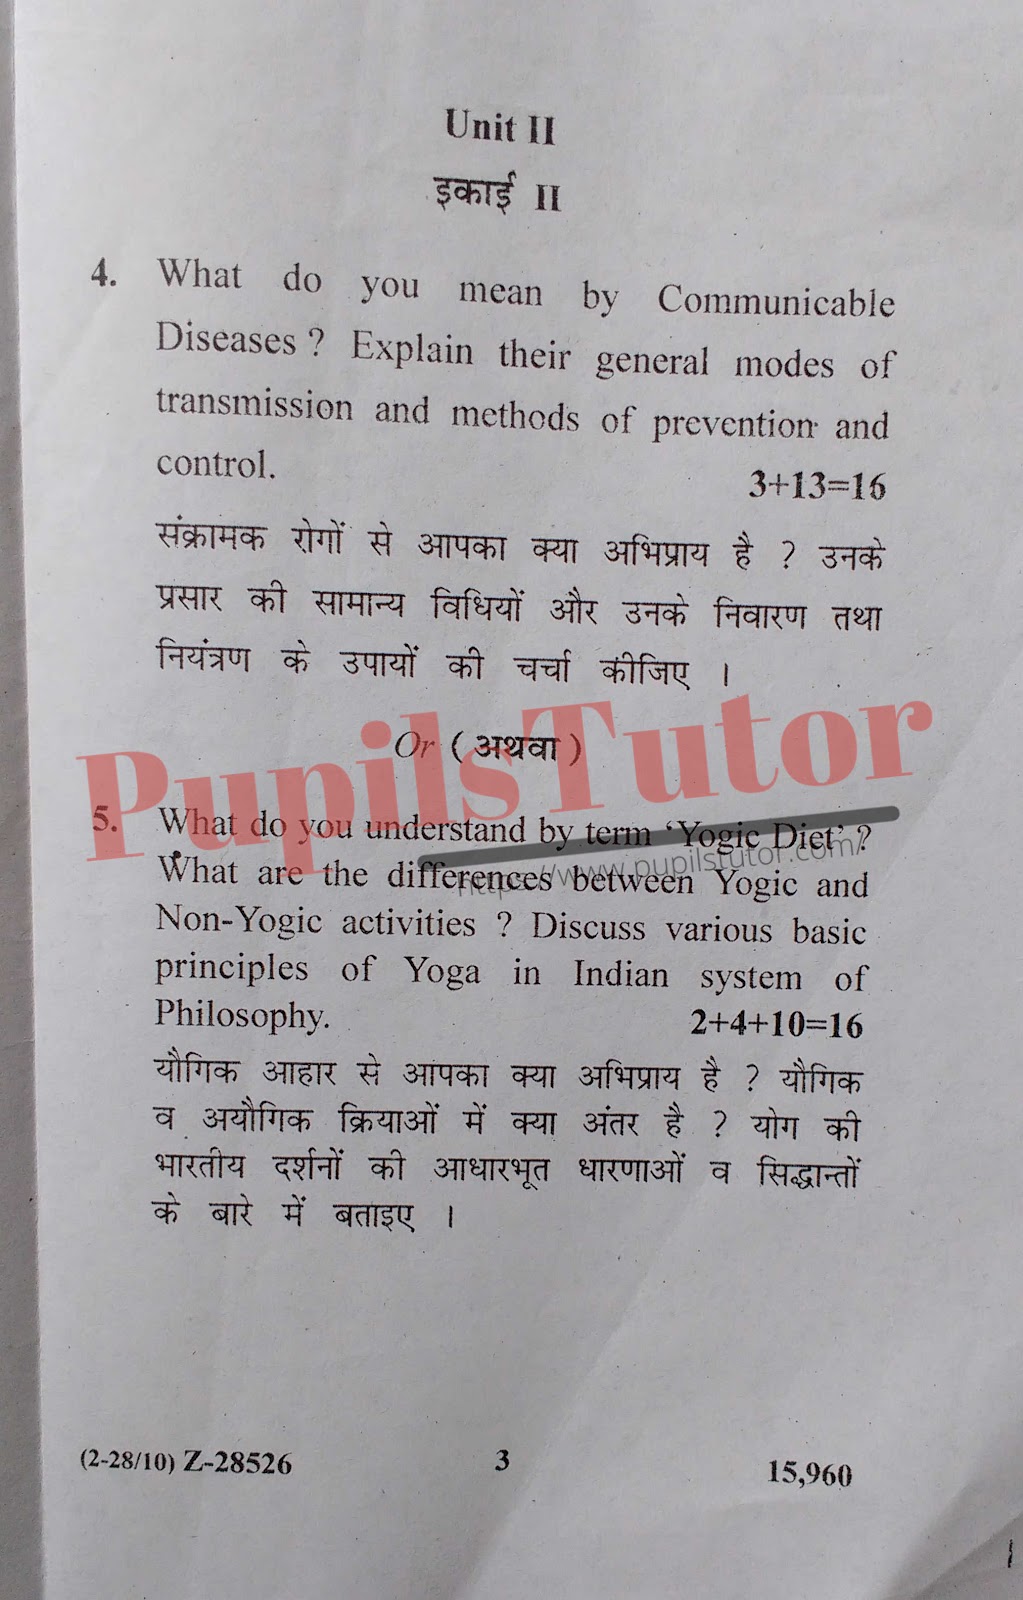 Free Download PDF Of M.D. University B.Ed Second Year Latest Question Paper For Health, Physical And Yoga Education Subject (Page 3) - https://www.pupilstutor.com